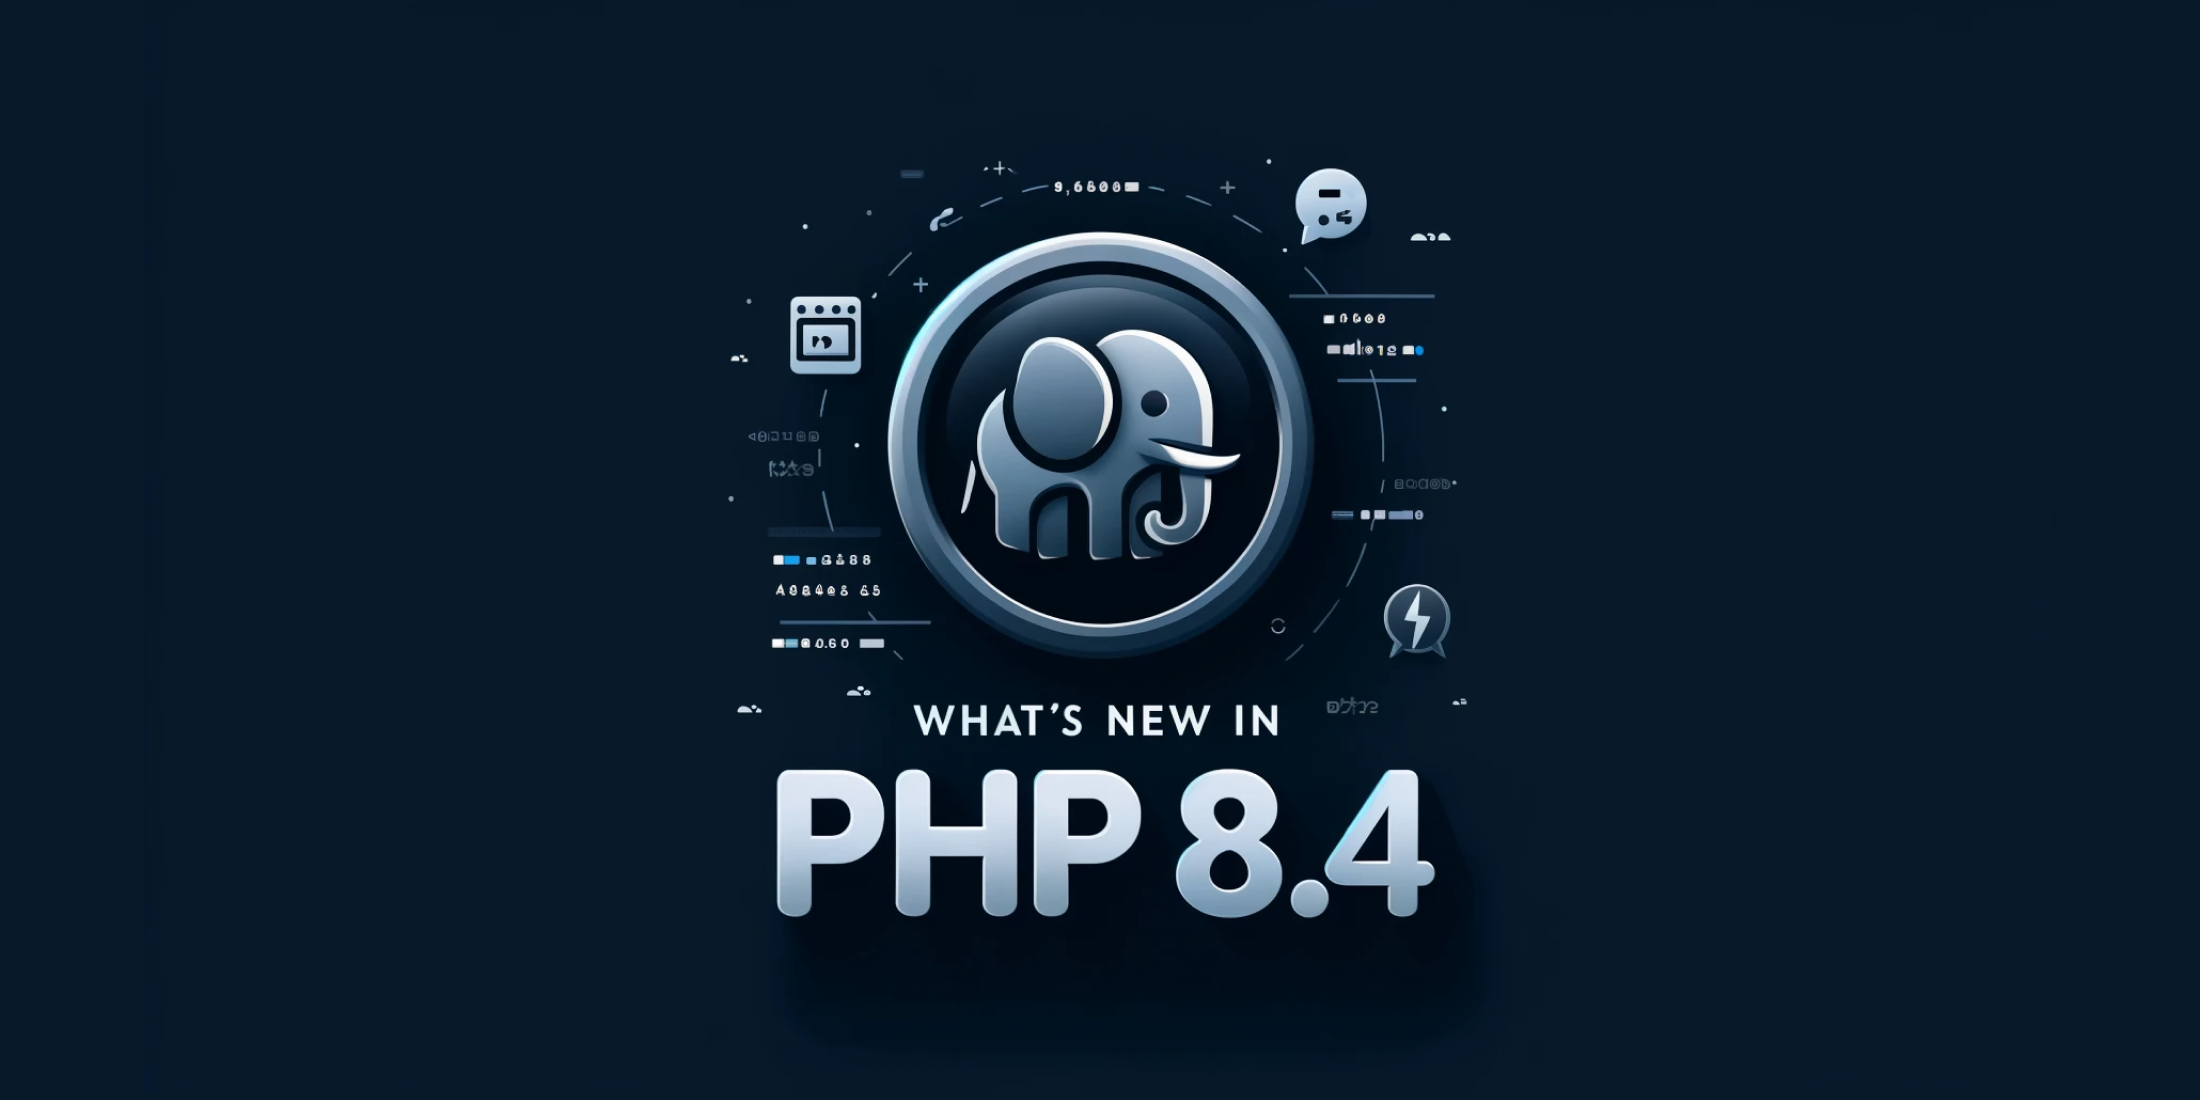 A Look at What's Coming to PHP 8.4